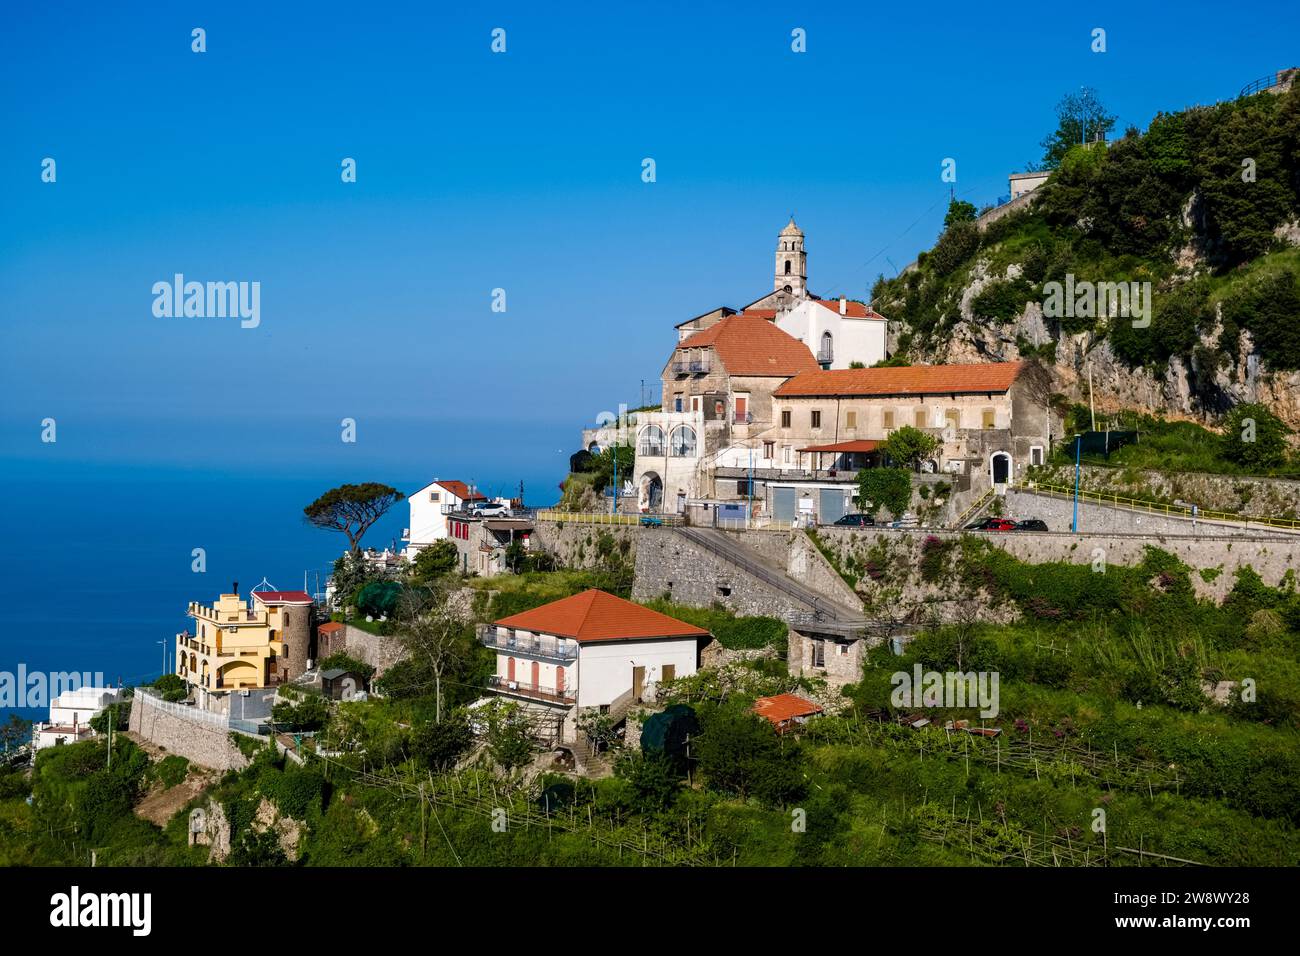 Houses and church of the small village of San Giacomo in Furore, situated on a hill slope overlooking the Mediterranean Sea. Stock Photo